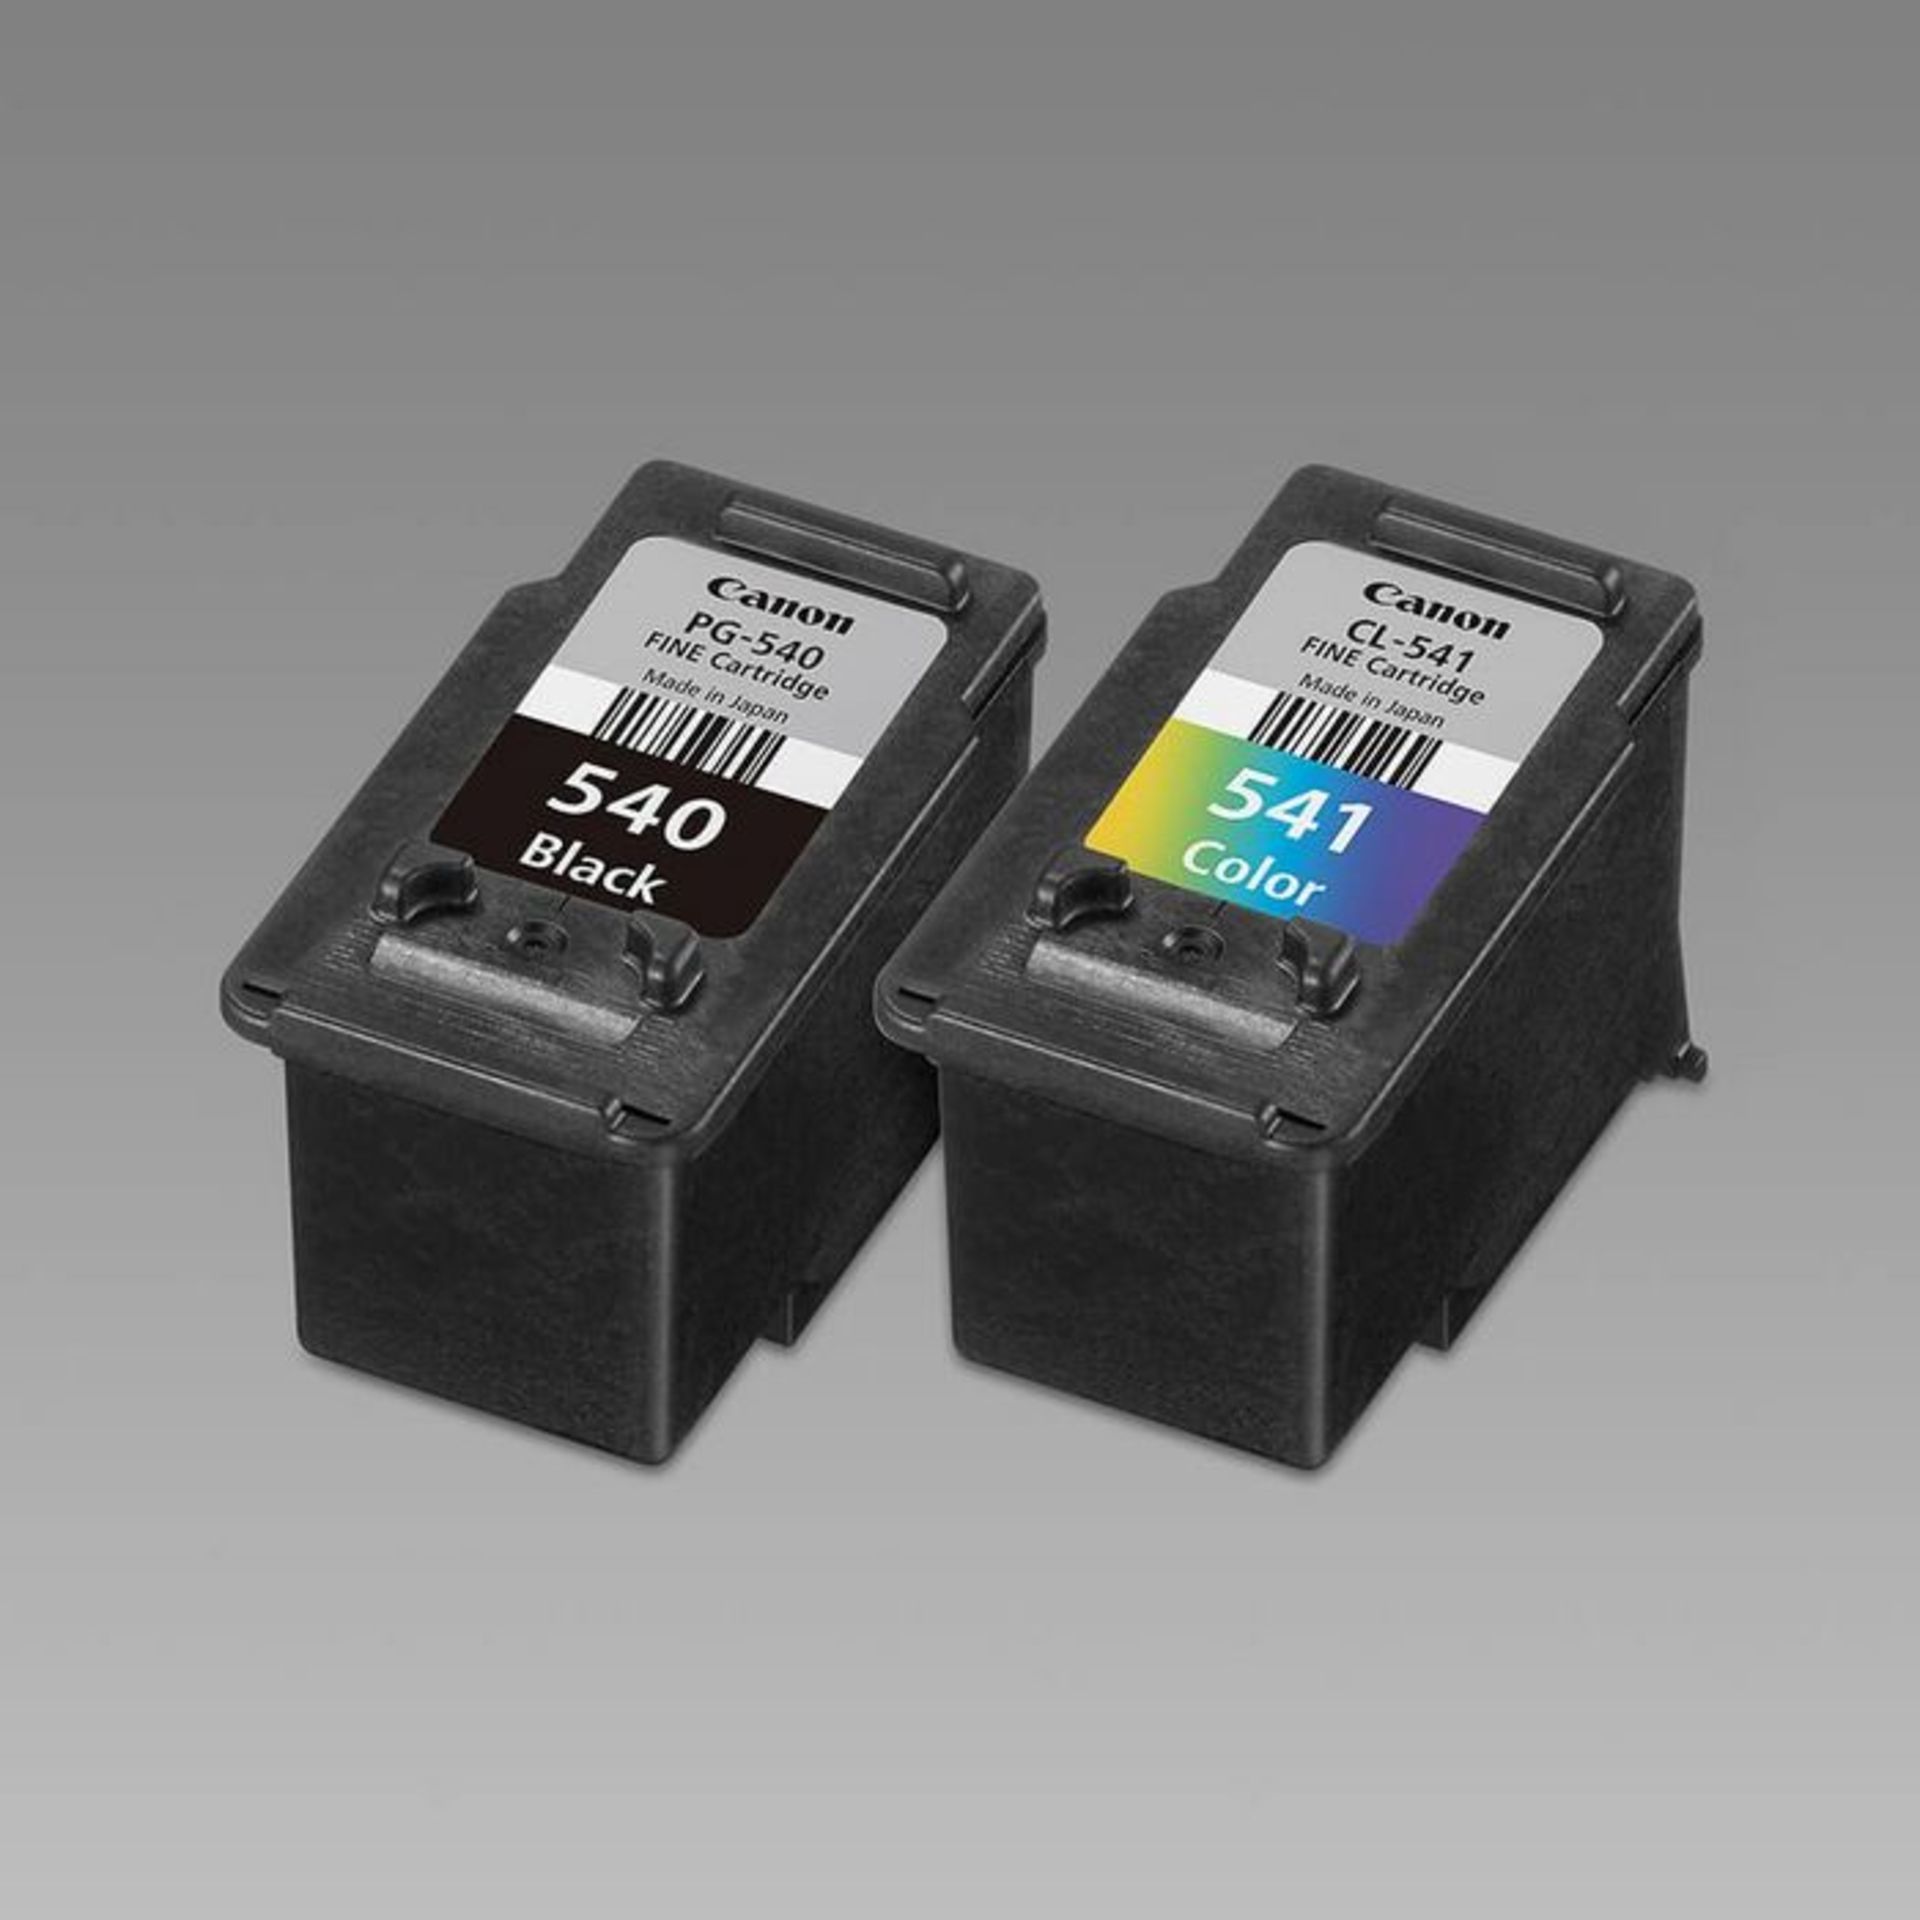 OVER 16000 BRAND NEW PRINTER CARTRIDGES/TONERS COMPATIBLE WITH BROTHER, EPSON, HP, CANON ETC. OVER 3 - Image 4 of 10